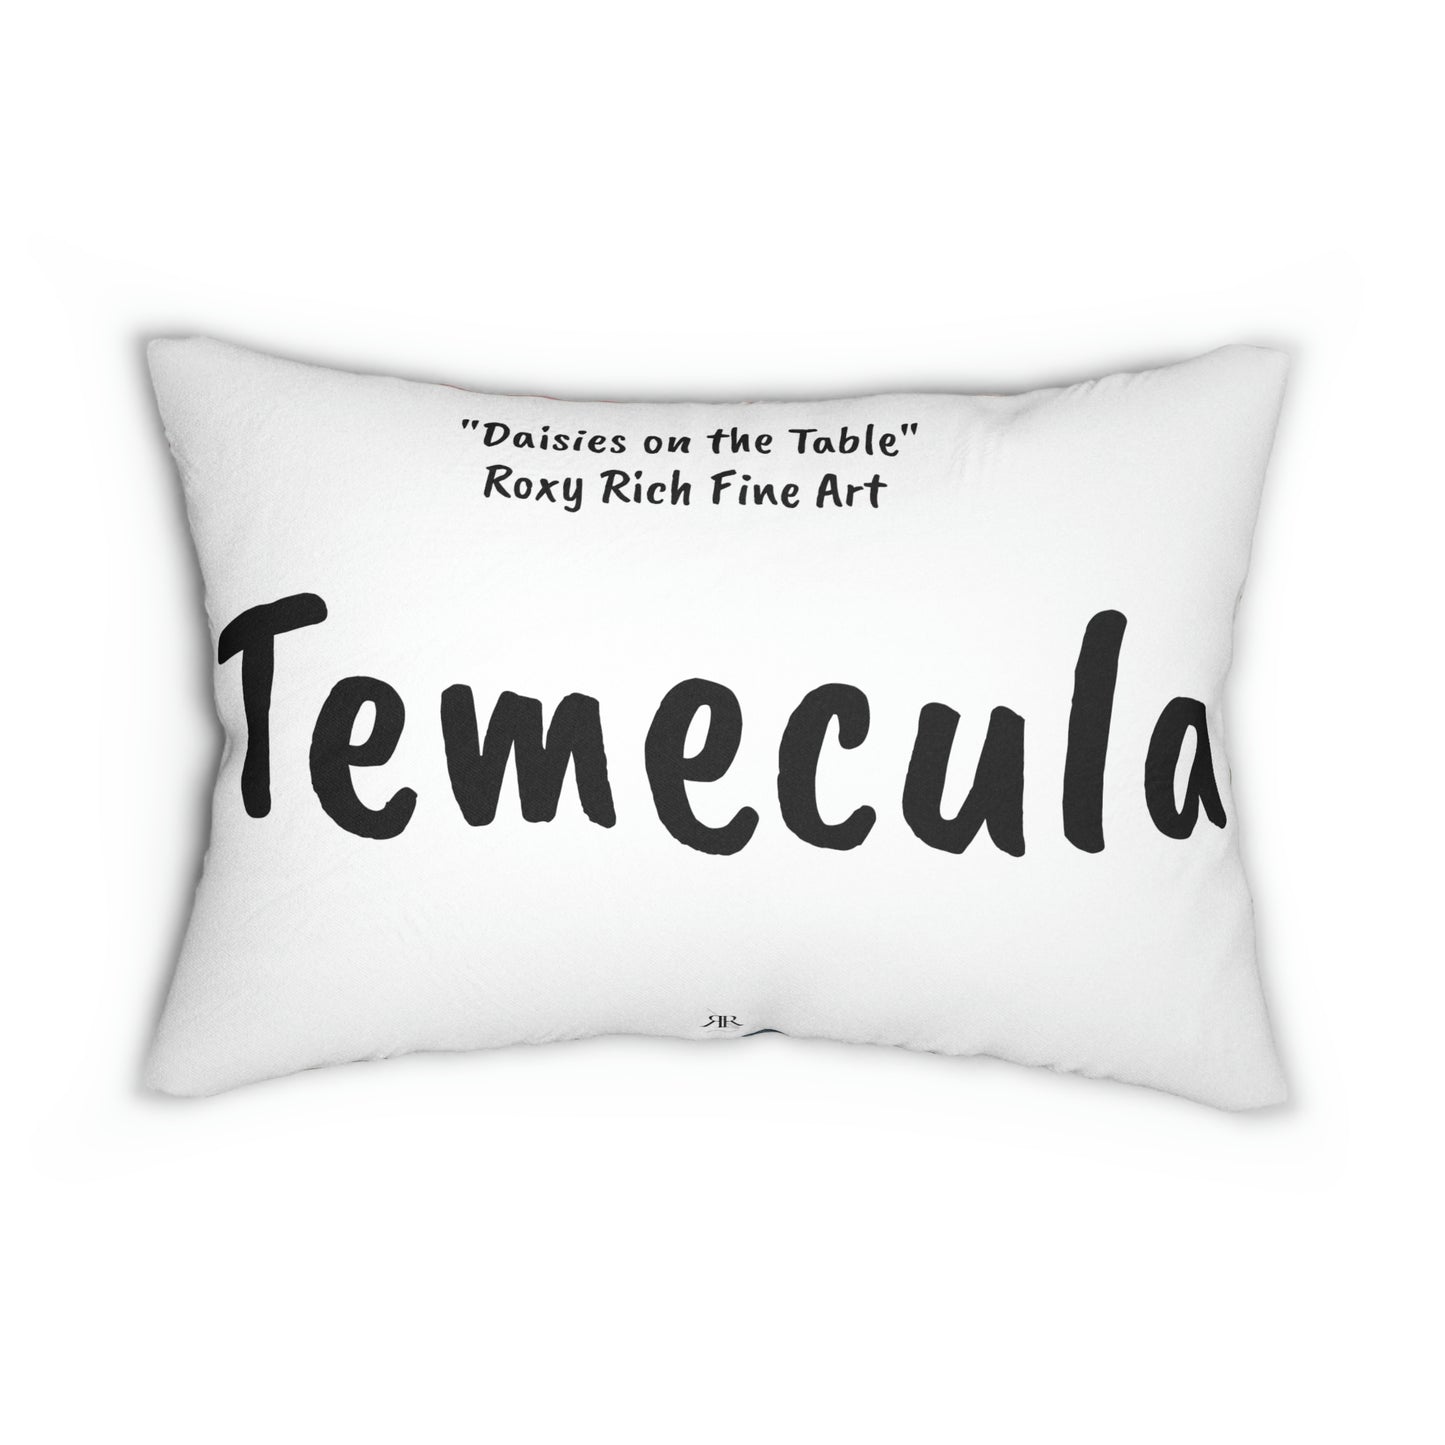 Temecula Lumbar Pillow featuring "Daisies on the Table" Roxy Rich Fine Art and "Temecula"